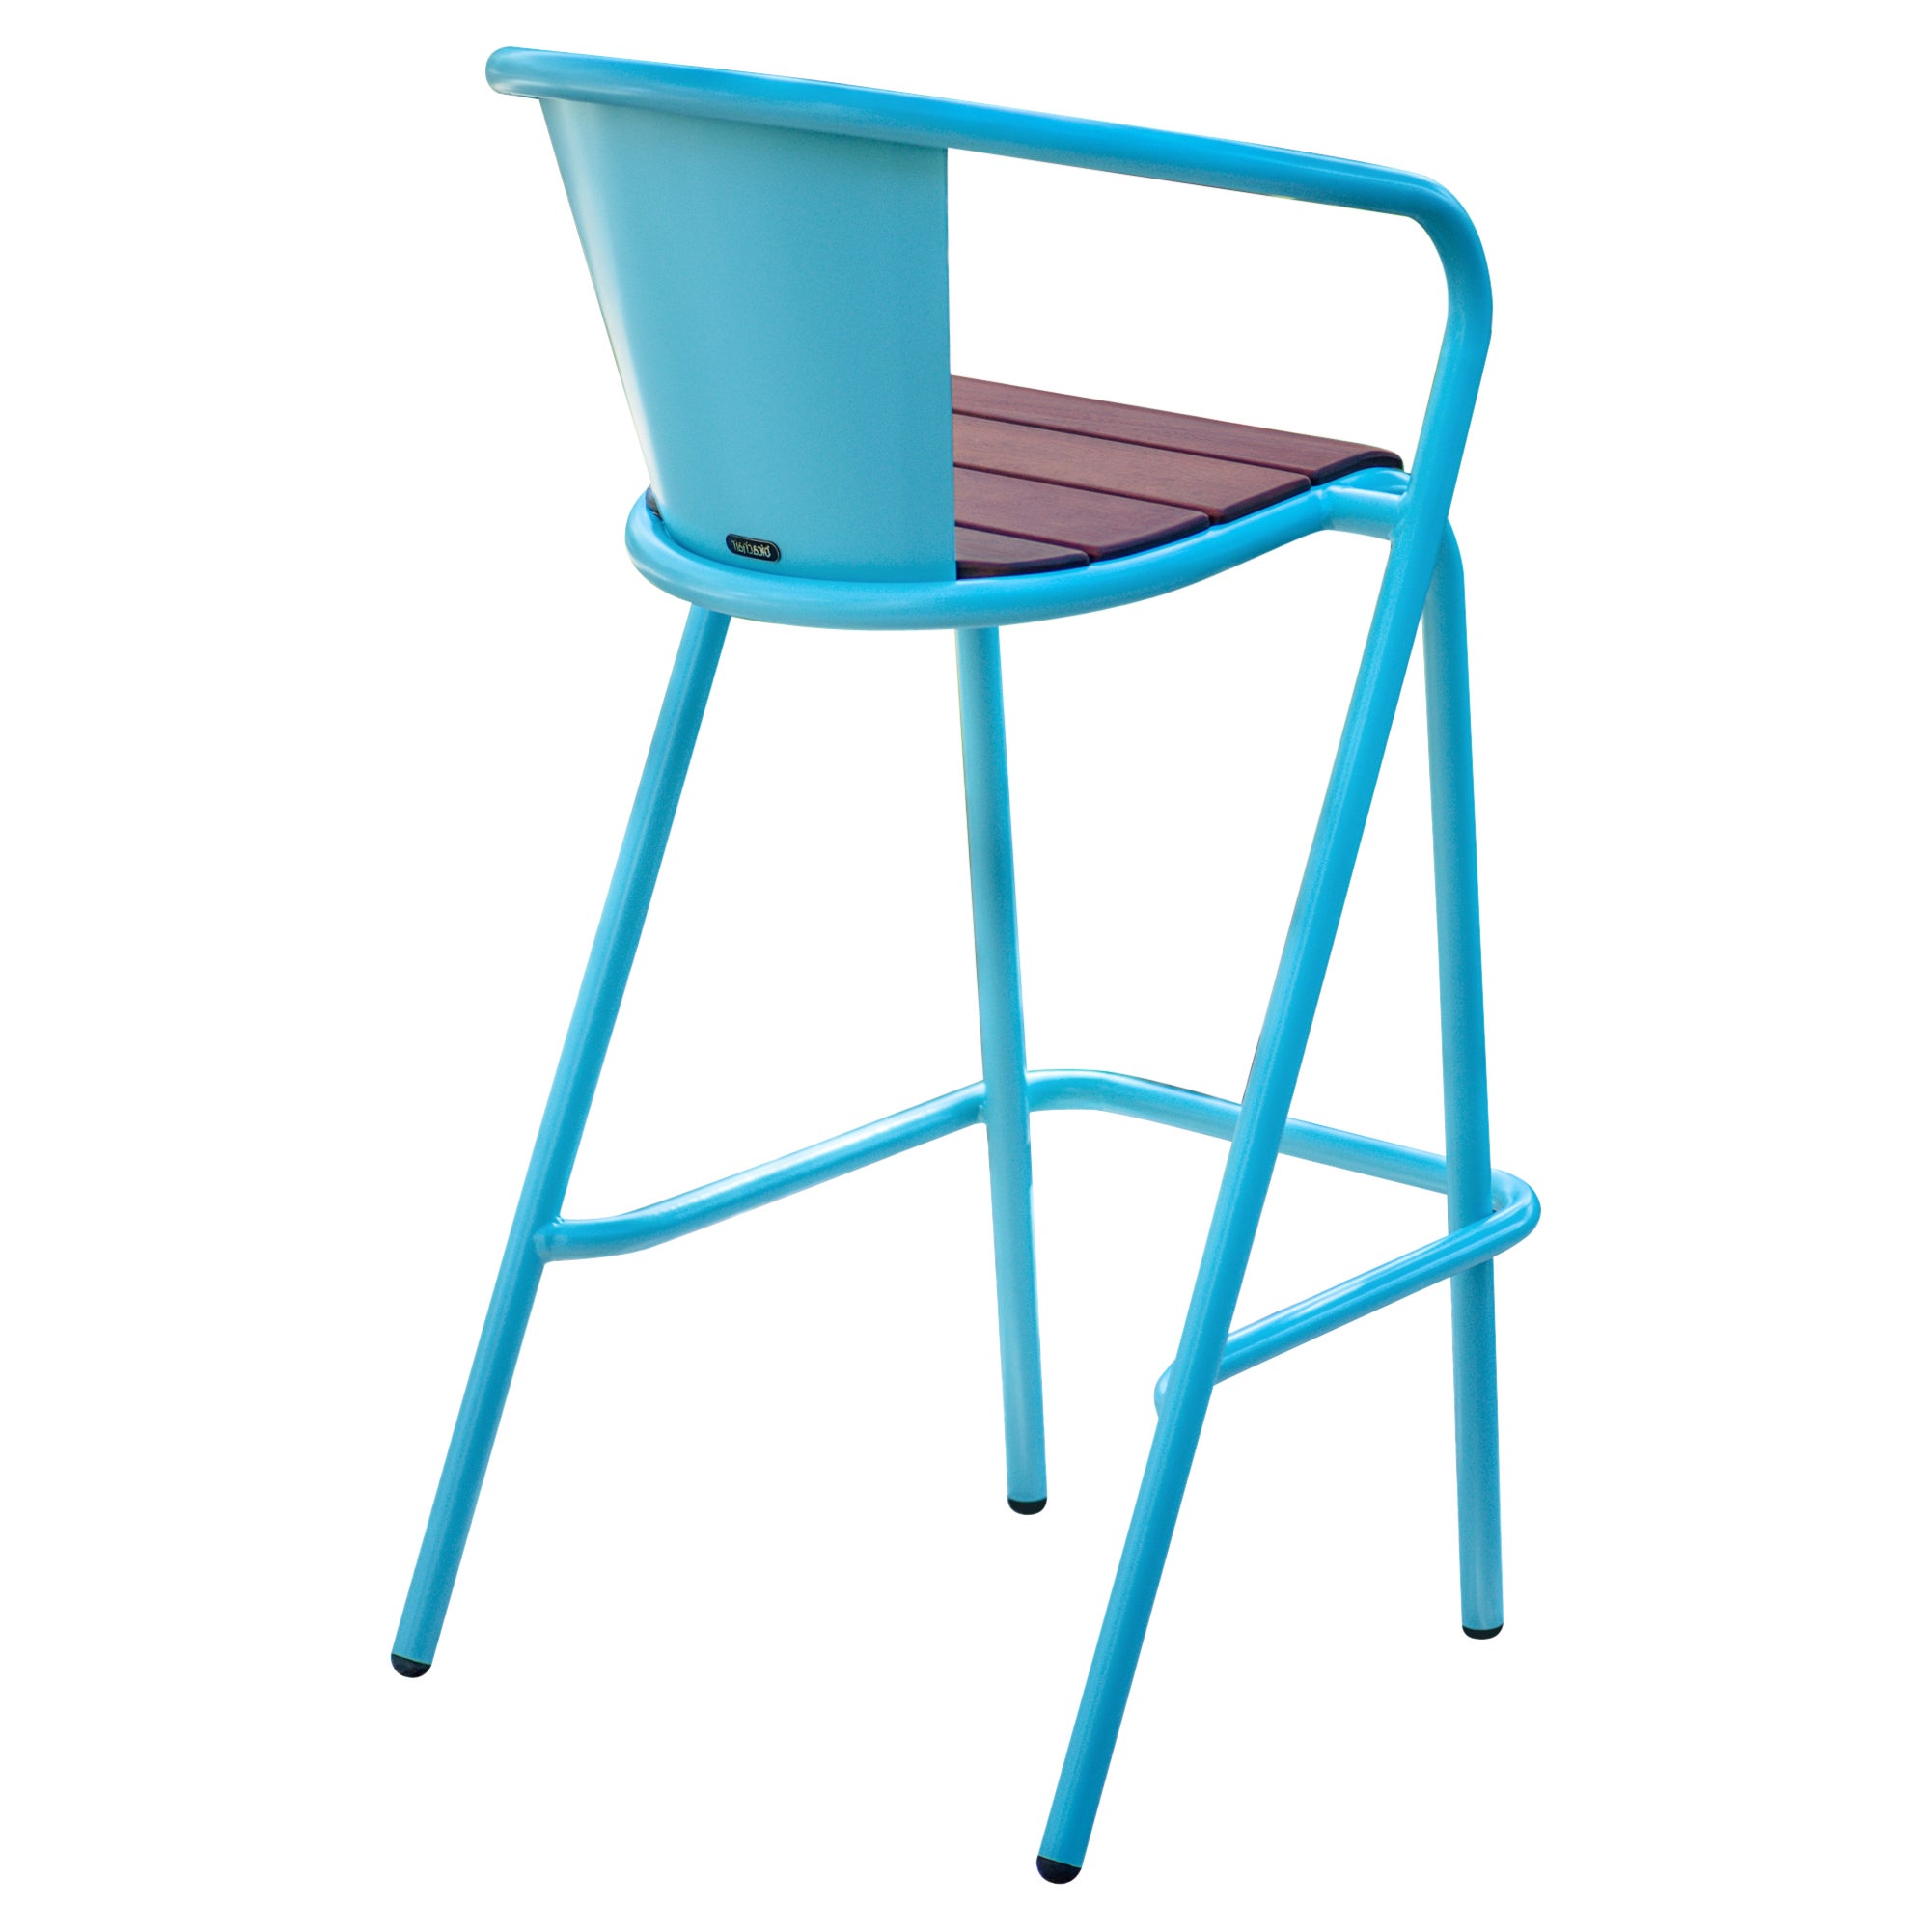 BICAstool Modern Outdoor Steel High Stool Chair Turquoise with Ipê Wood Slabs